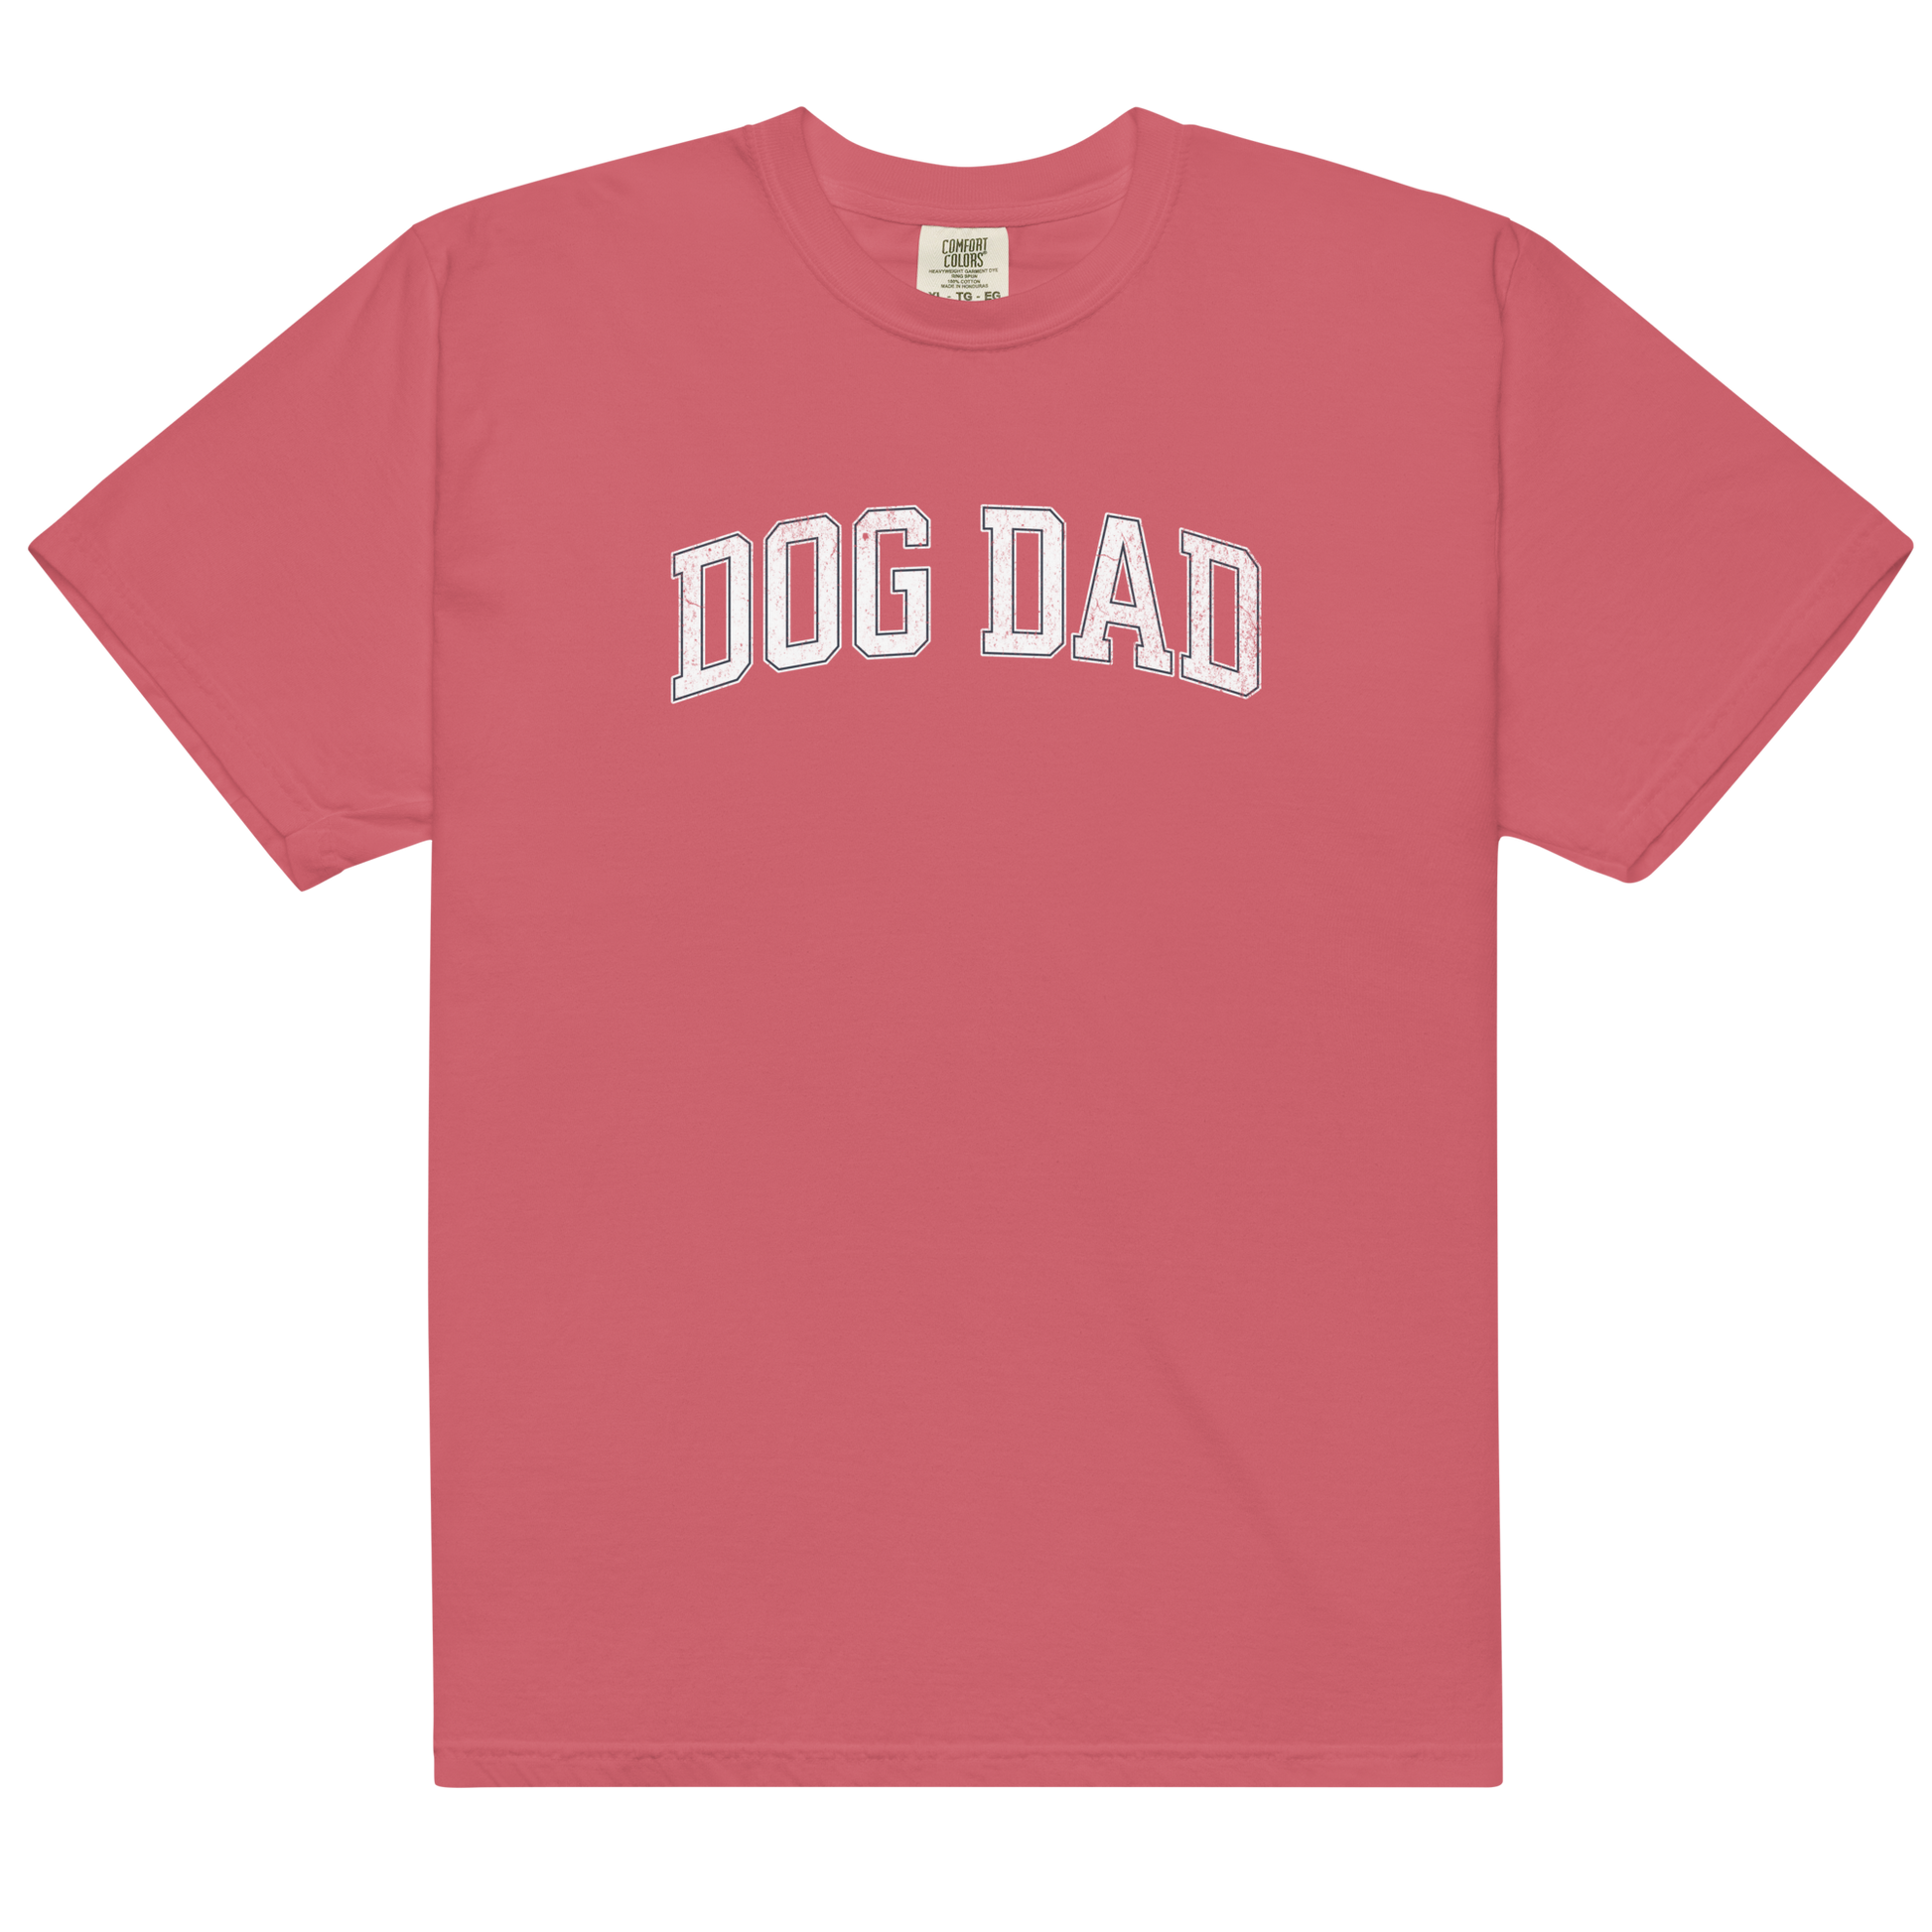 Dog Dad Comfort Colors Garment-Dyed Heavyweight T-Shirt - Ruff Roasters Coffee Co.